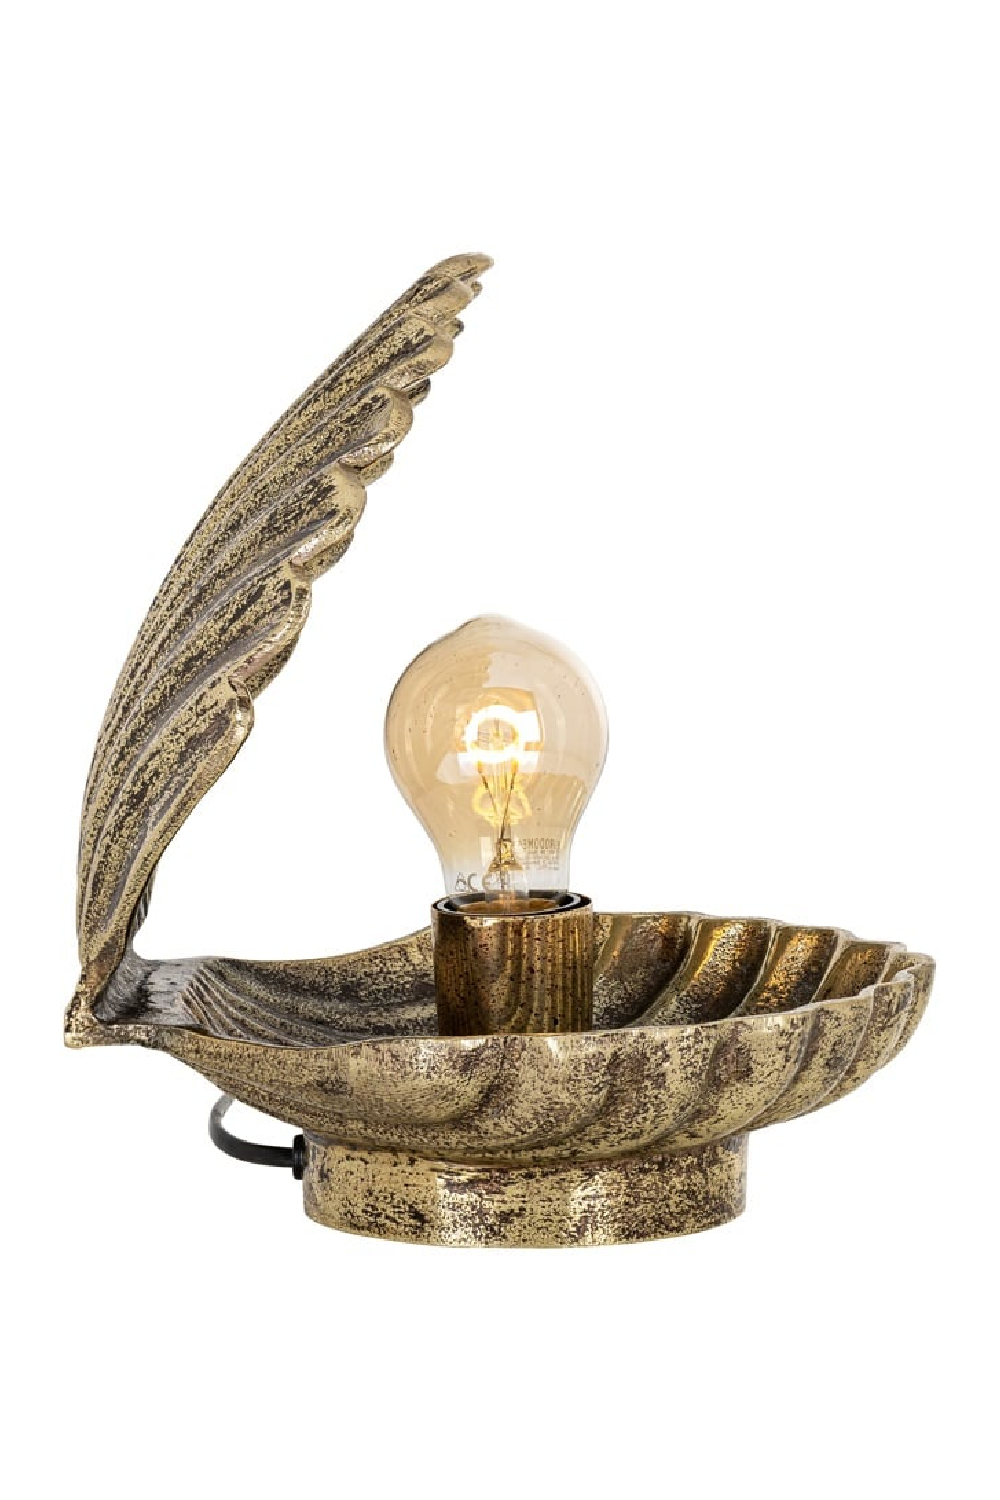 Gold Clamshell Table Lamp | OROA Stacey | Oroa.com